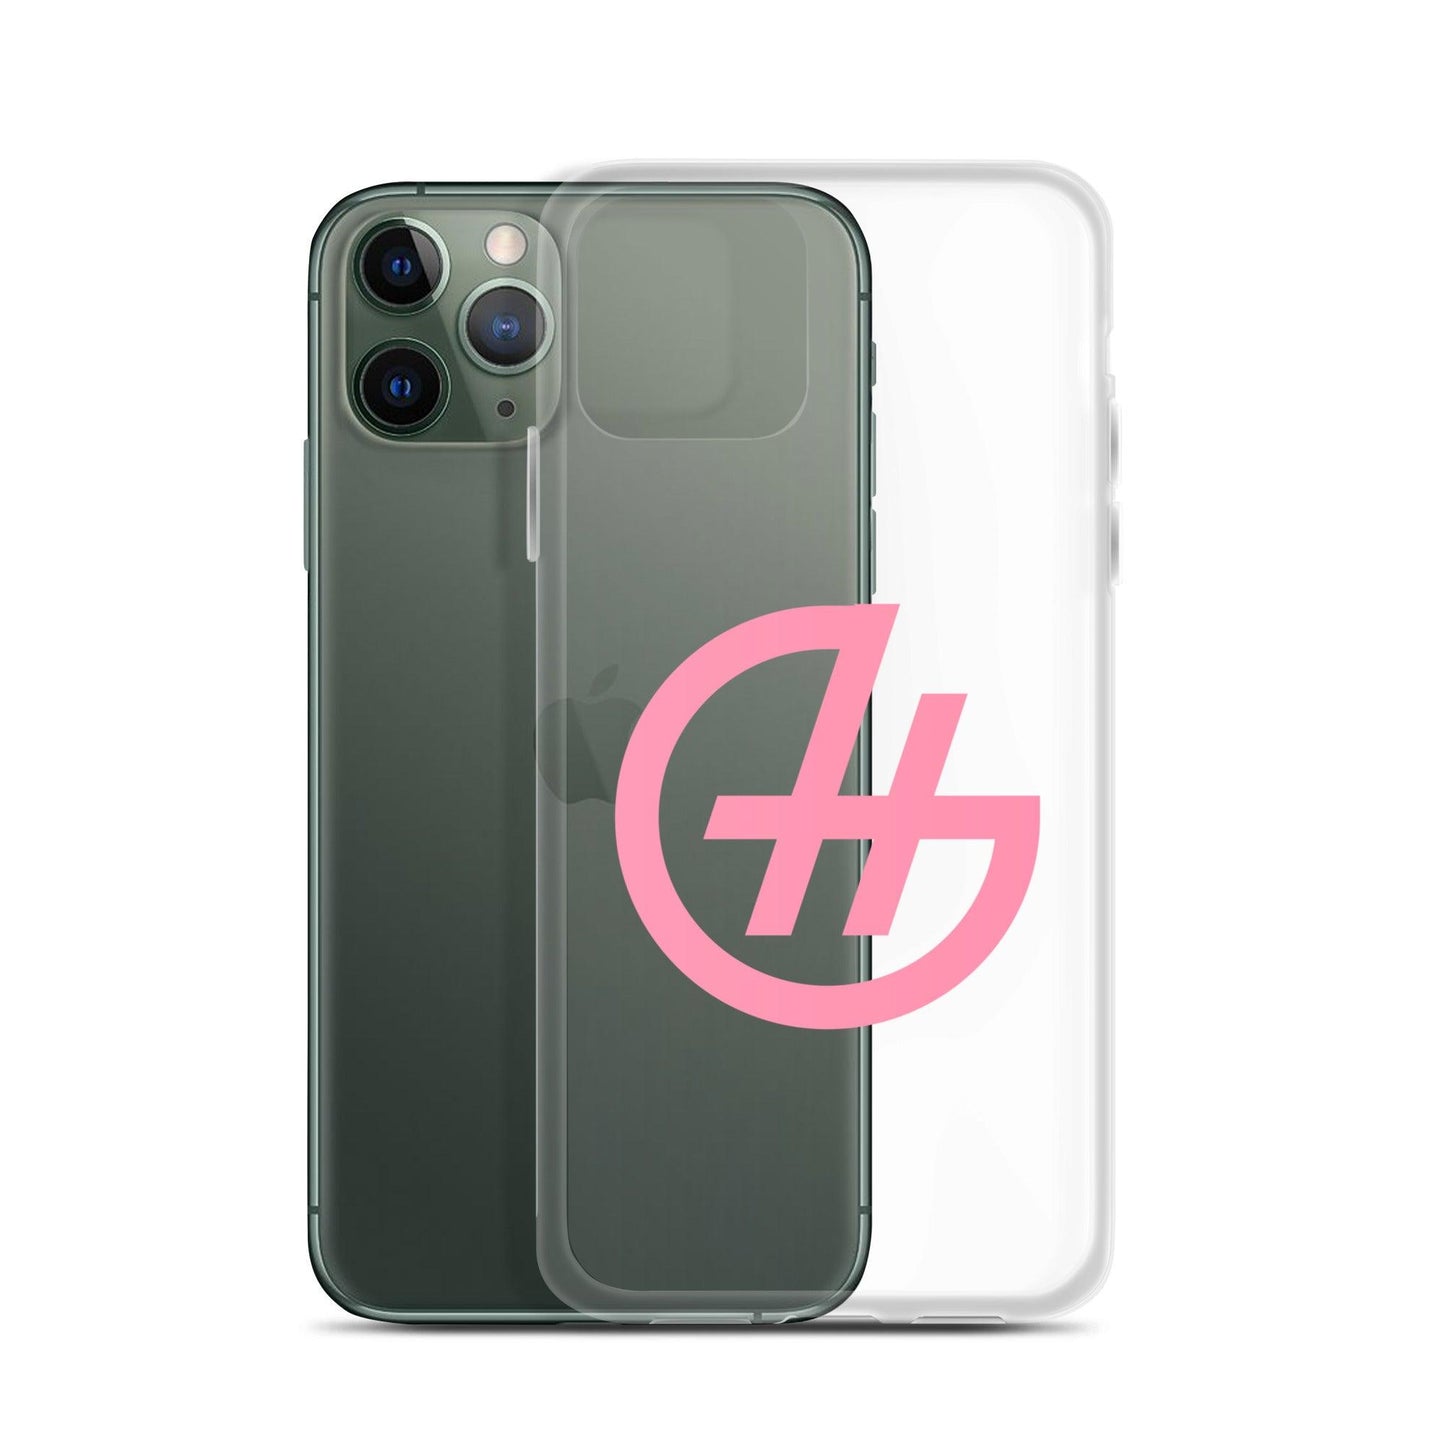 Hannah Gusters "The Brand" iPhone Case - Fan Arch